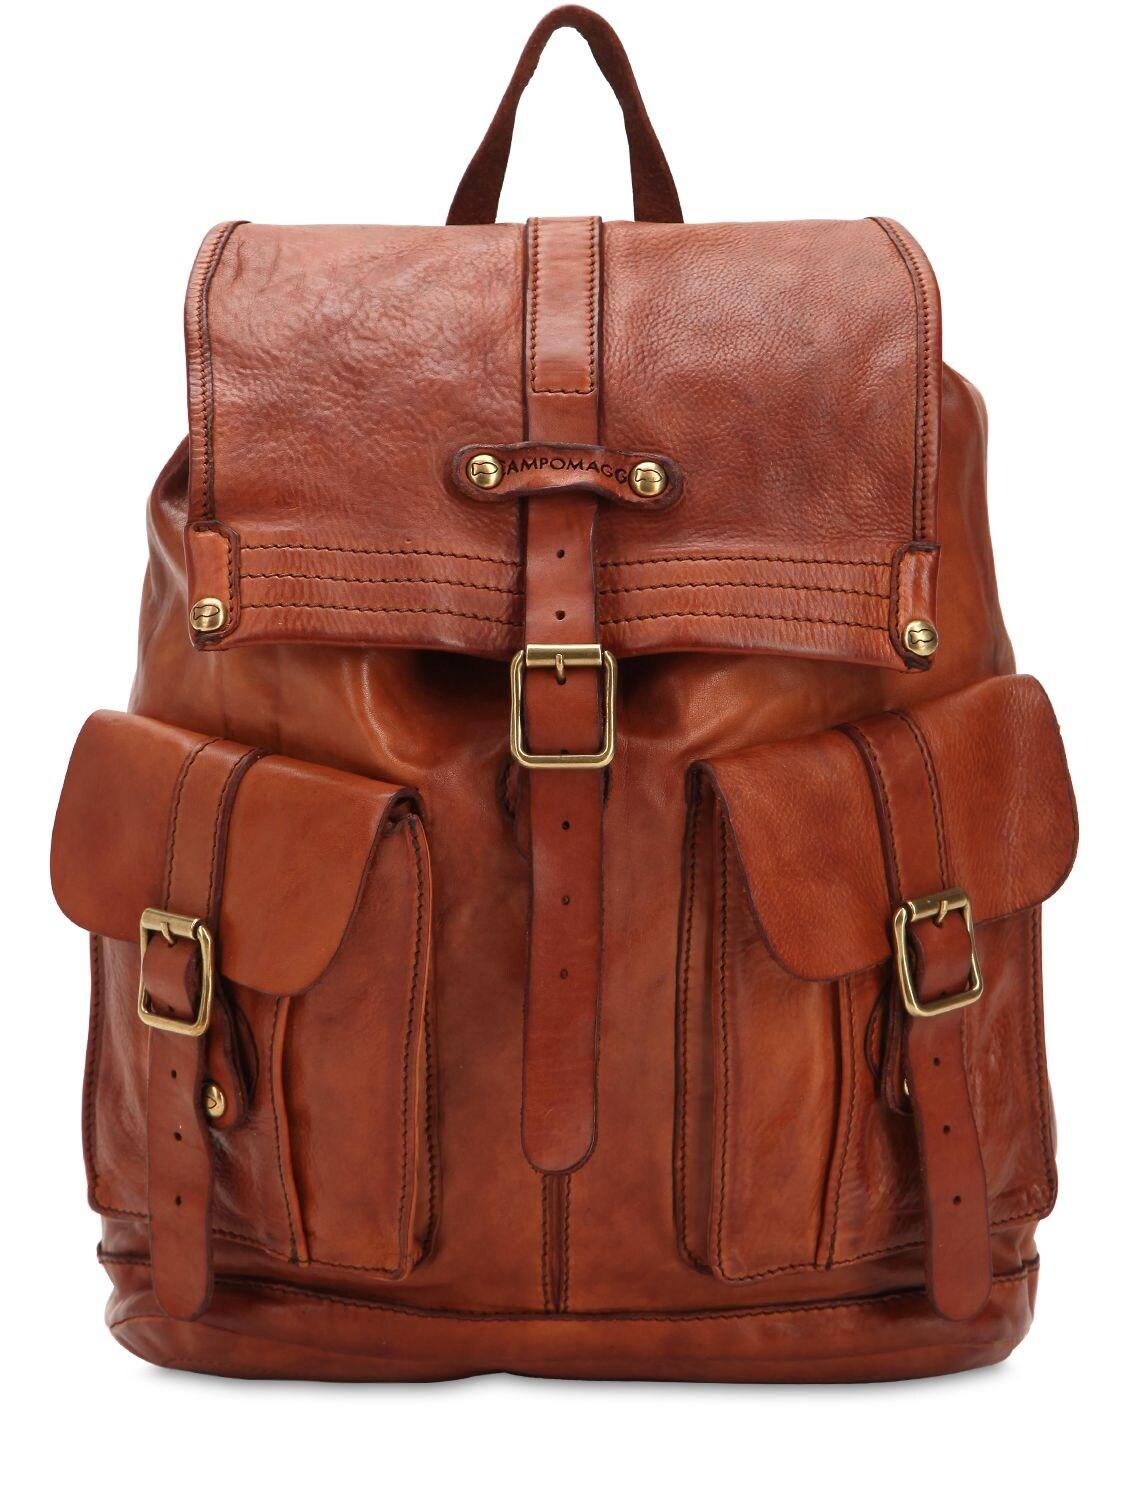 Campomaggi Studded Leather Backpack in Brown for Men - Save 10% - Lyst